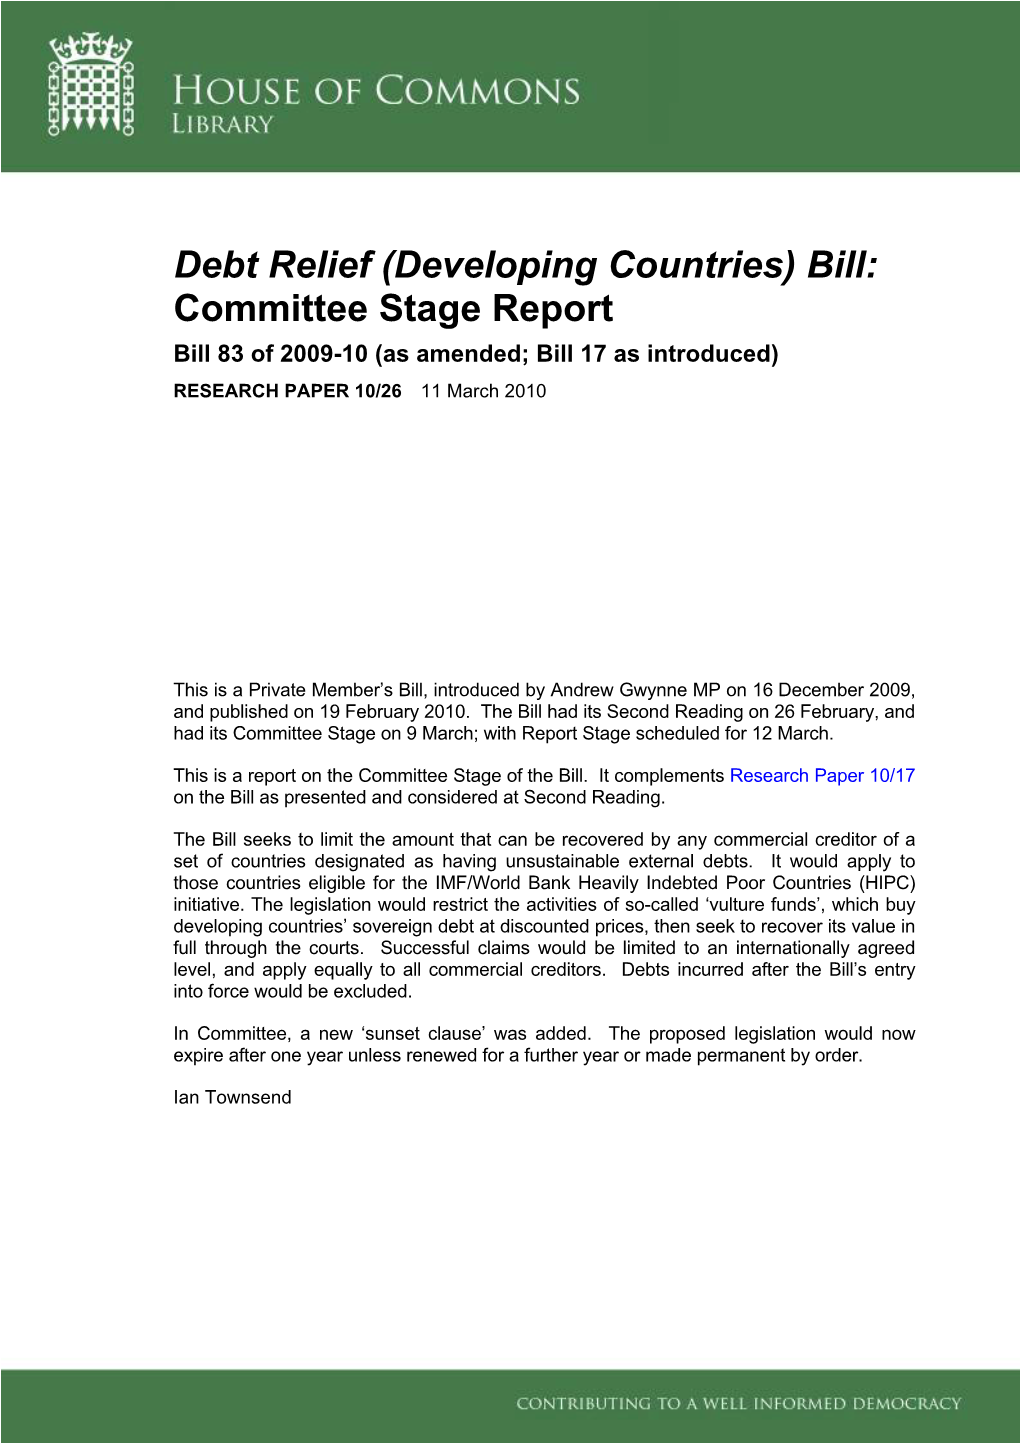 Debt Relief (Developing Countries) Bill: Committee Stage Report Bill 83 of 2009-10 (As Amended; Bill 17 As Introduced) RESEARCH PAPER 10/26 11 March 2010